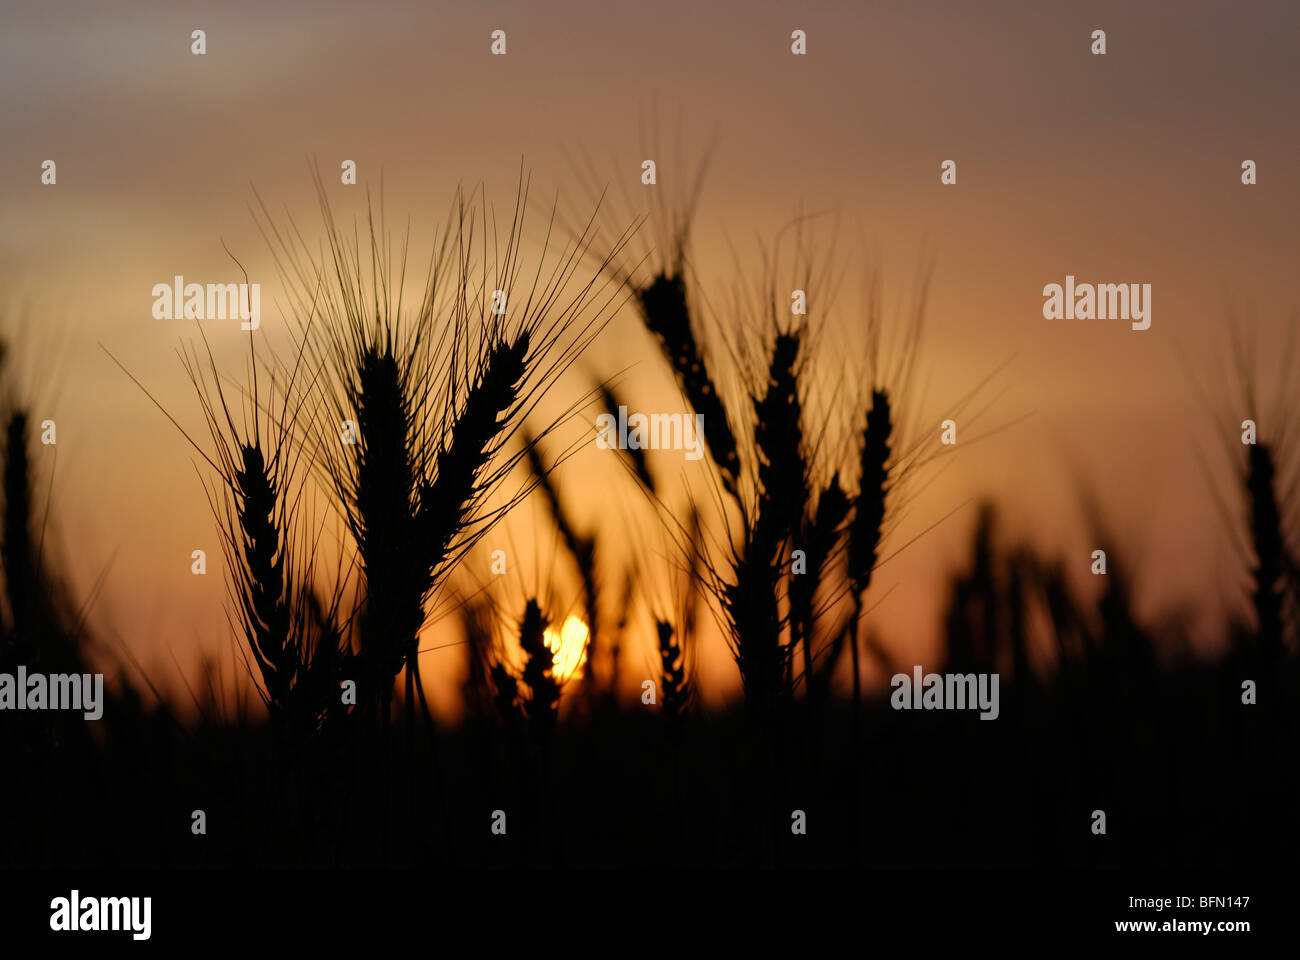 Silhouette of wheat stalks and grain at sunset Stock Photo